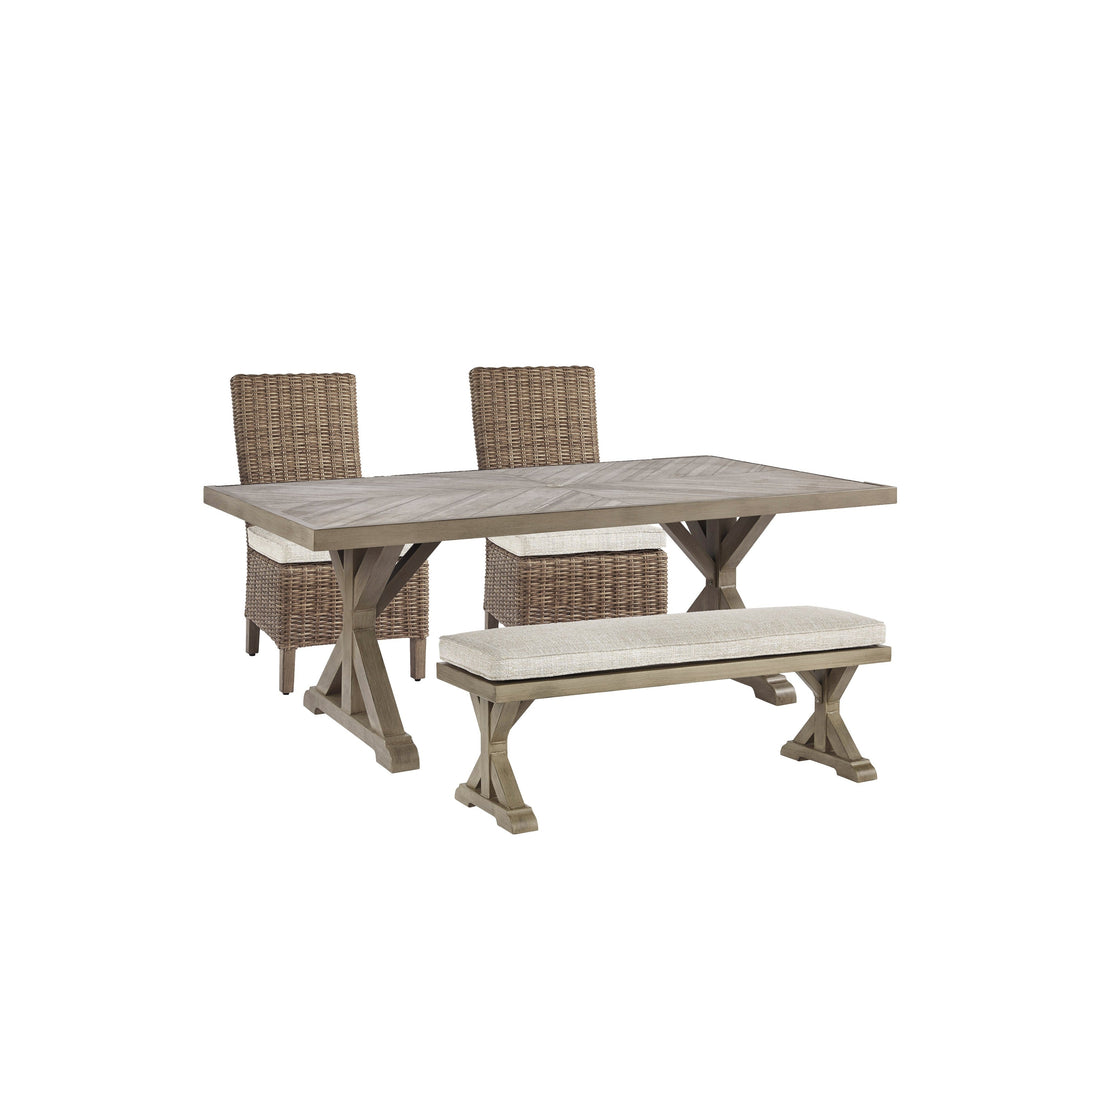 Beachcroft Outdoor Dining Table with 2 Chairs and 2 Benches Ash-P791P3